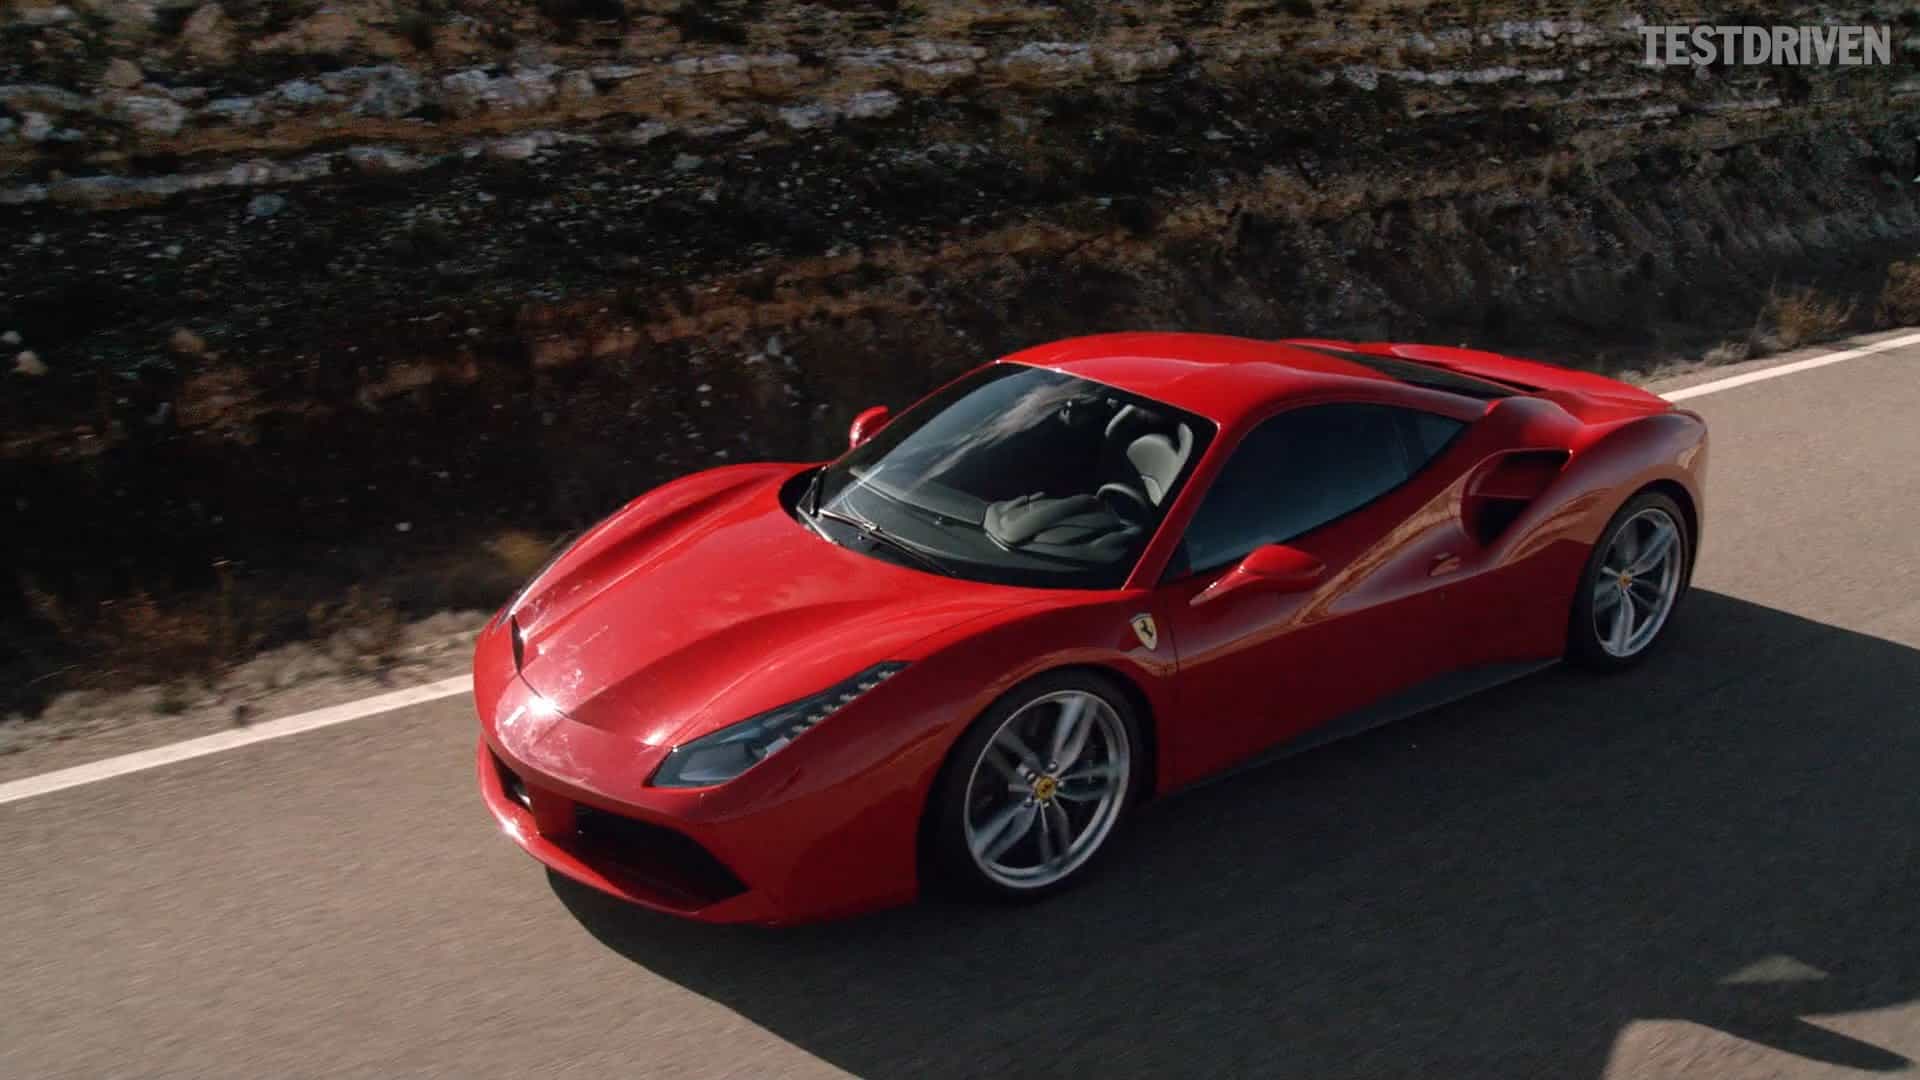 Check Out The Ferrari 488 GTB In Action (Video) - SpeedTwitch